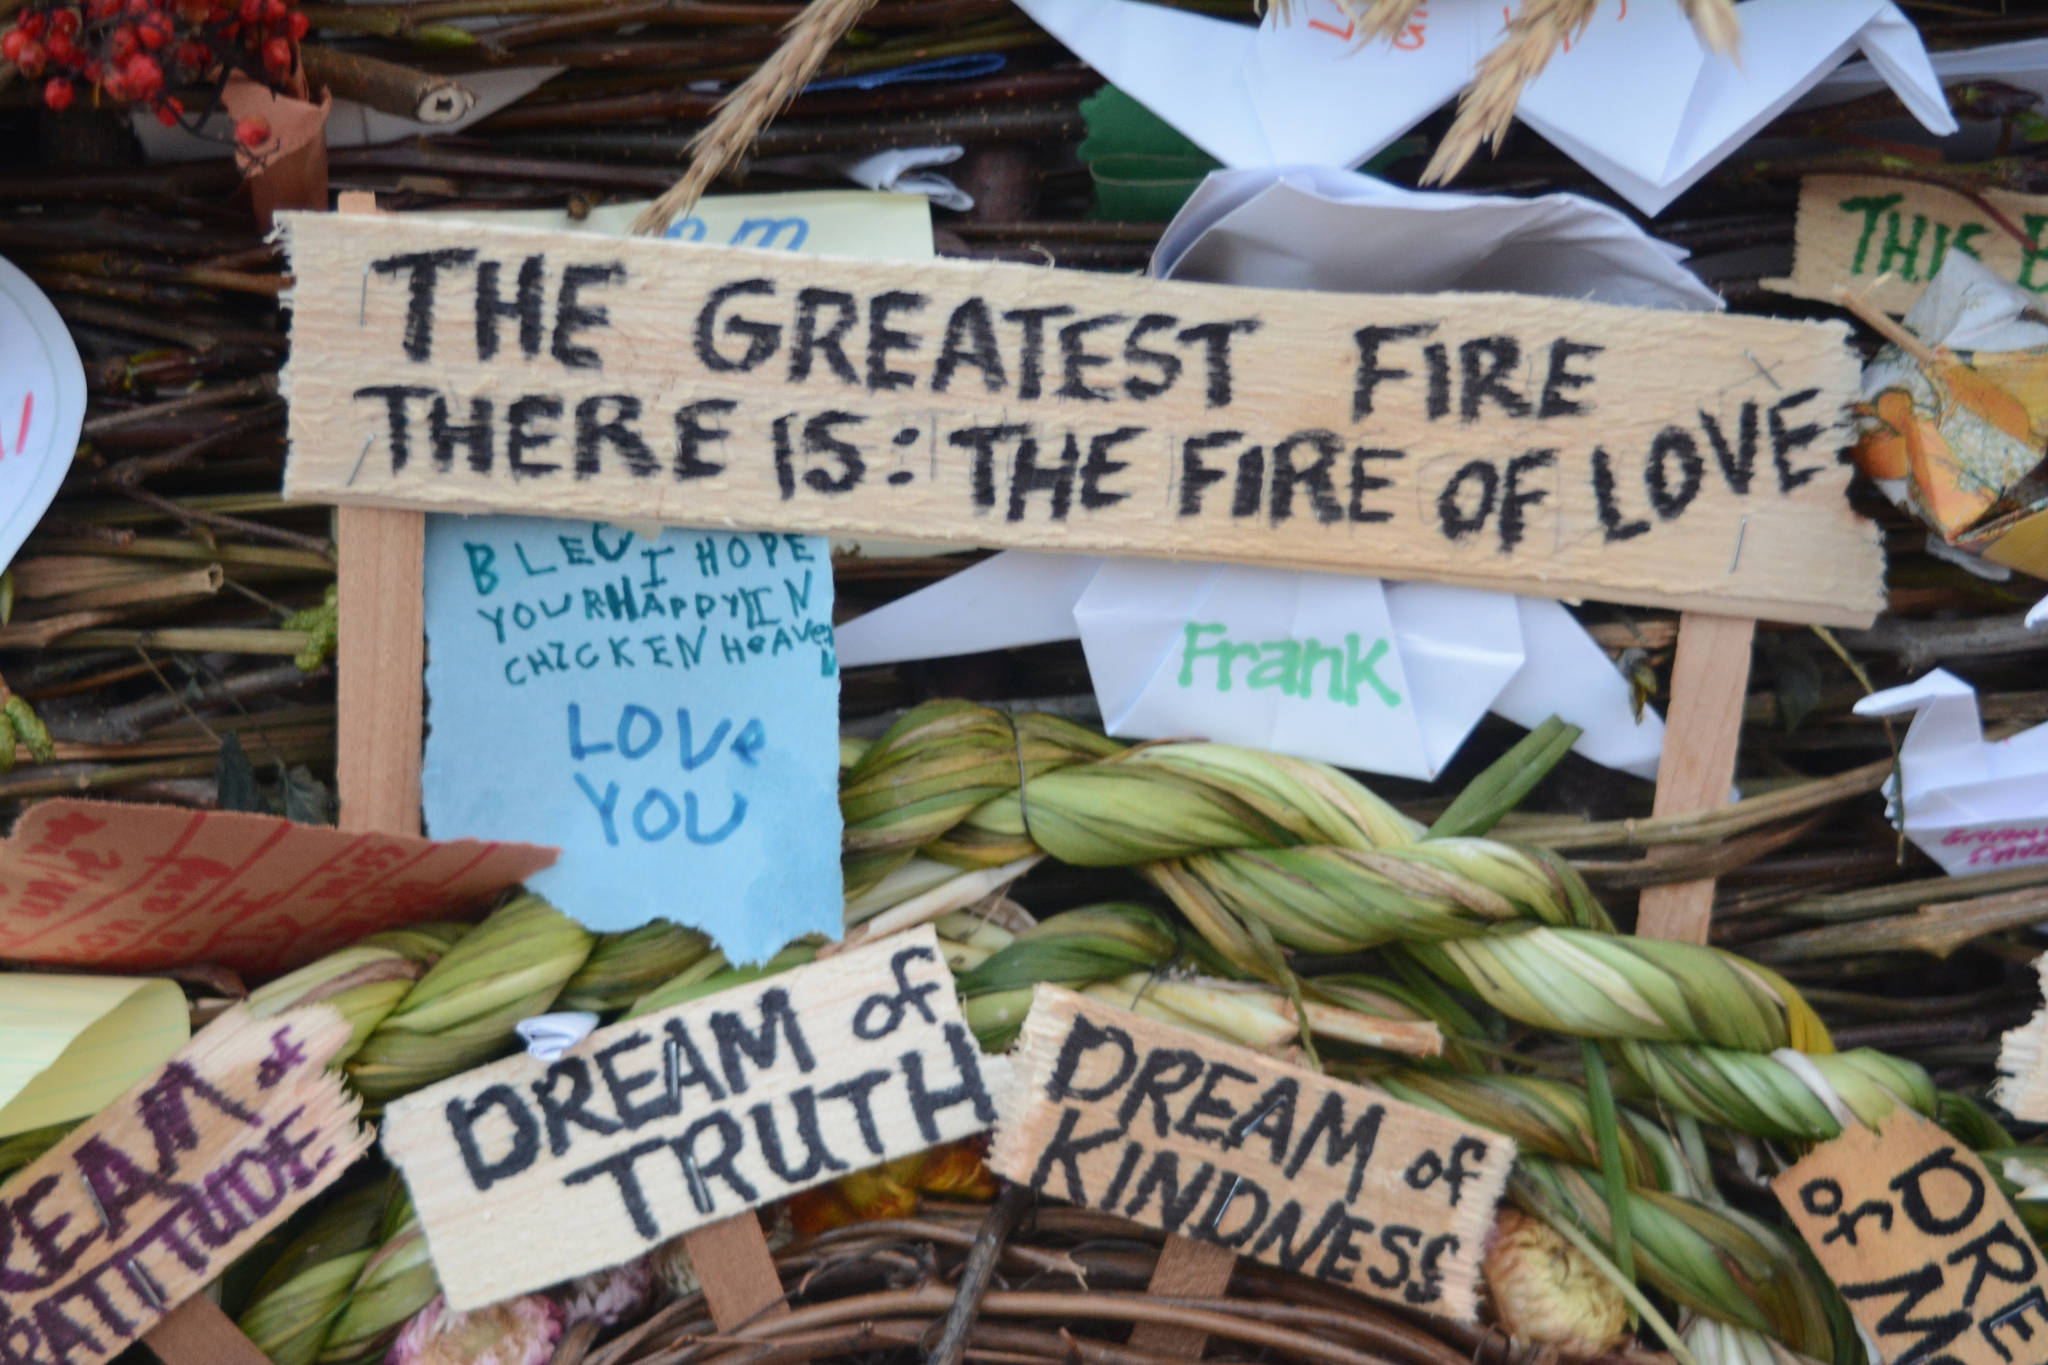 Signs and other objects adorn the 2018 Burning Basket, Dream, on Sept. 9, 2018 at Mariner Park in Homer, Alaska. (Photo by Michael Armstrong/Homer News)